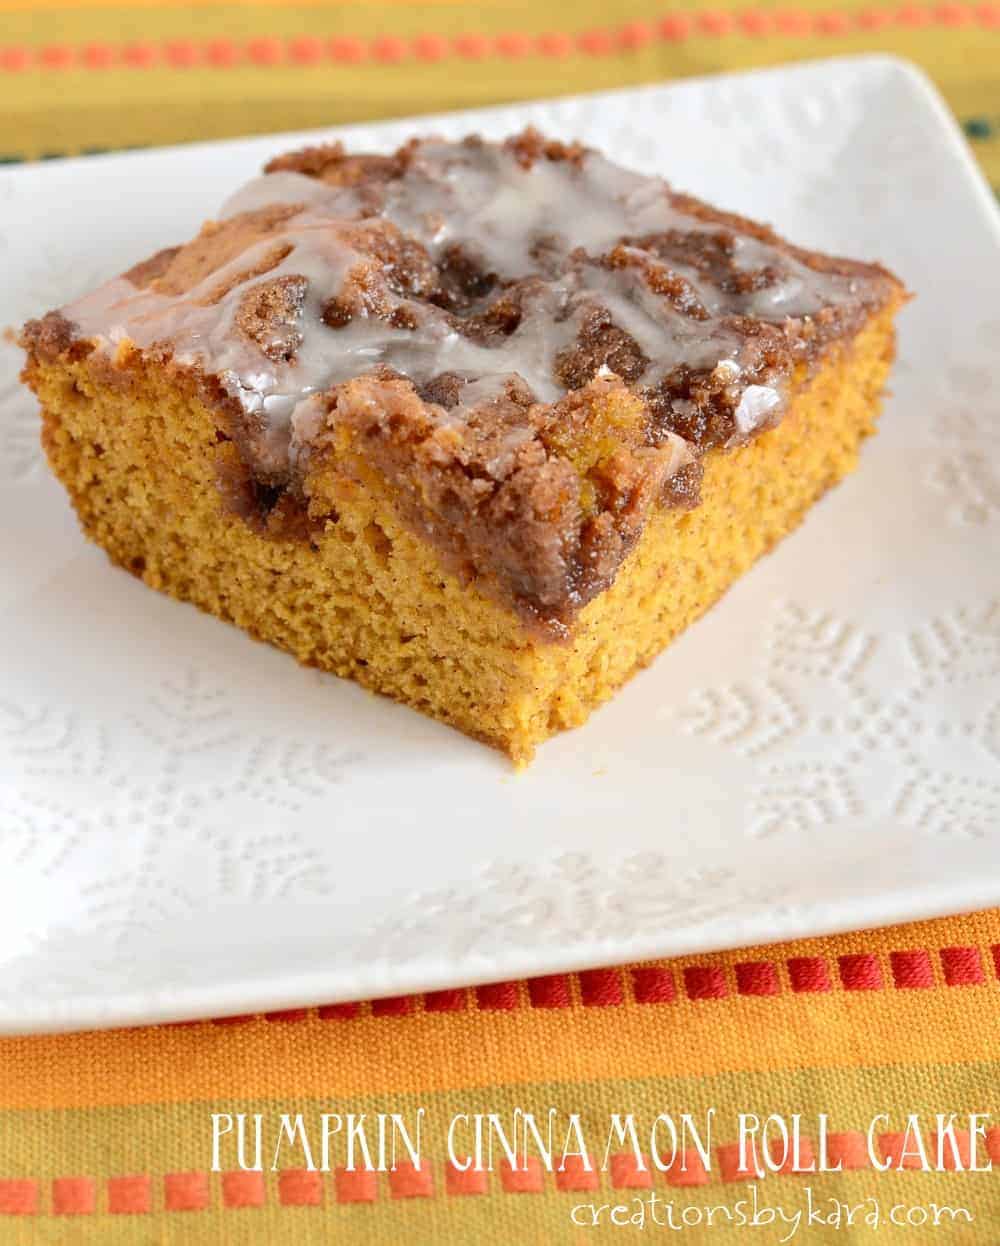 Pockets of cinnamon sugar make this Pumpkin Cinnamon Roll Cake one of the best pumpkin cakes you will ever eat!